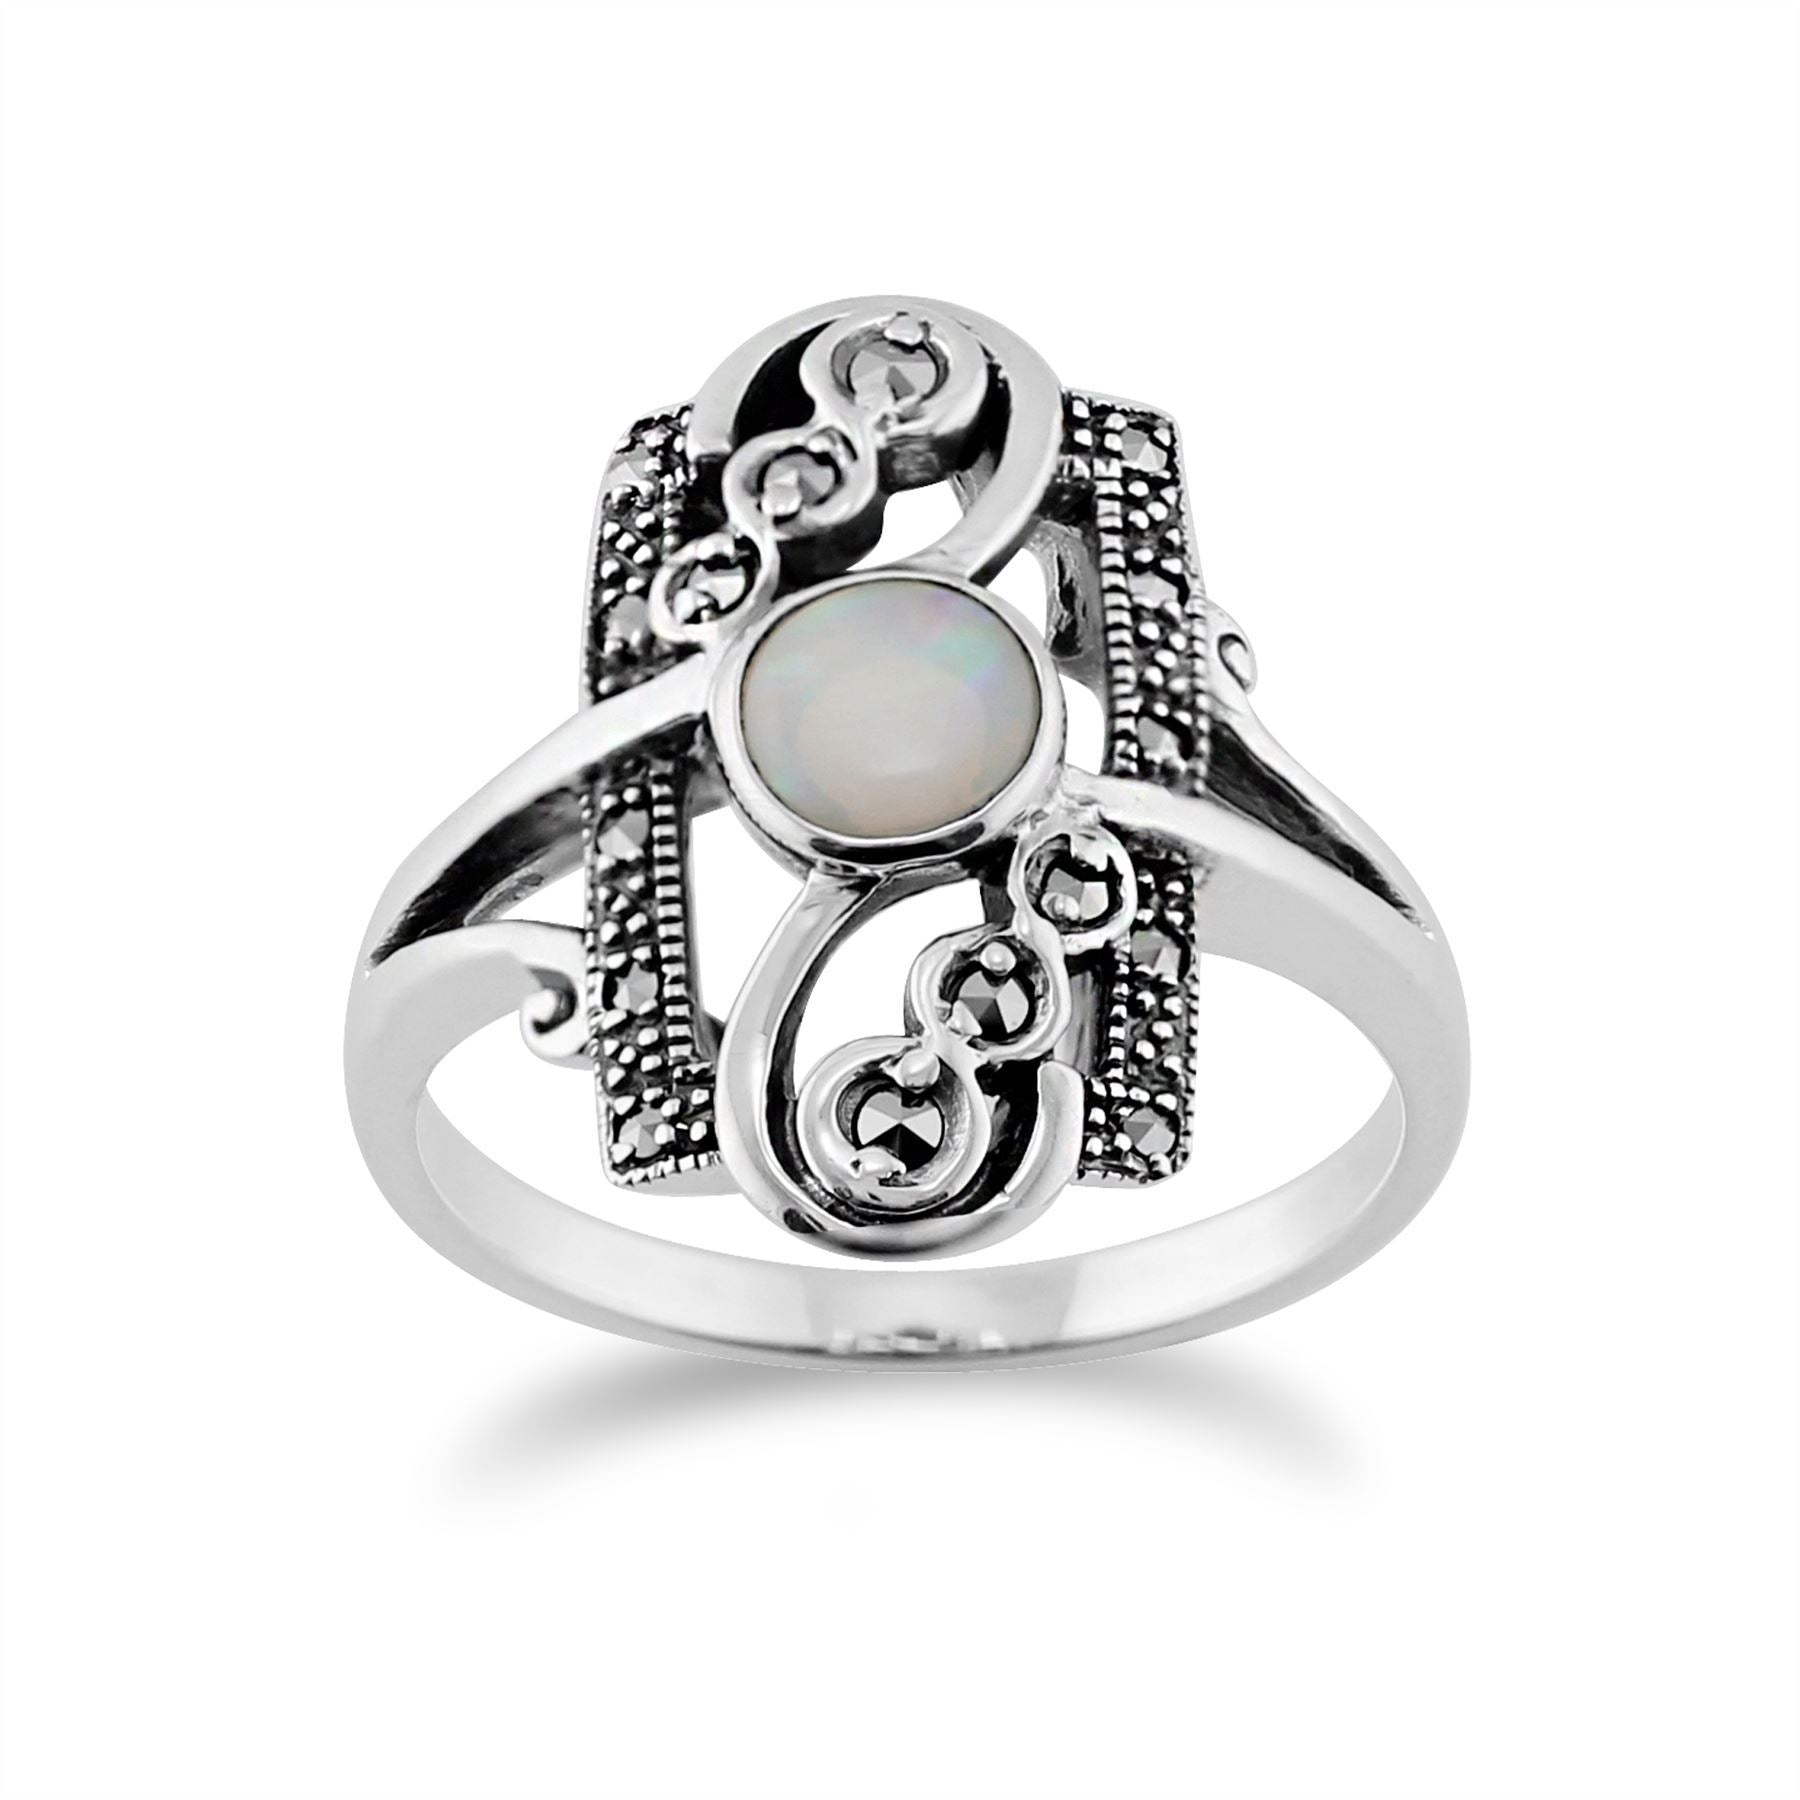 Art Nouveau Style Round Opal & Marcasite Spiral Frame Ring in 925 Sterling Silver